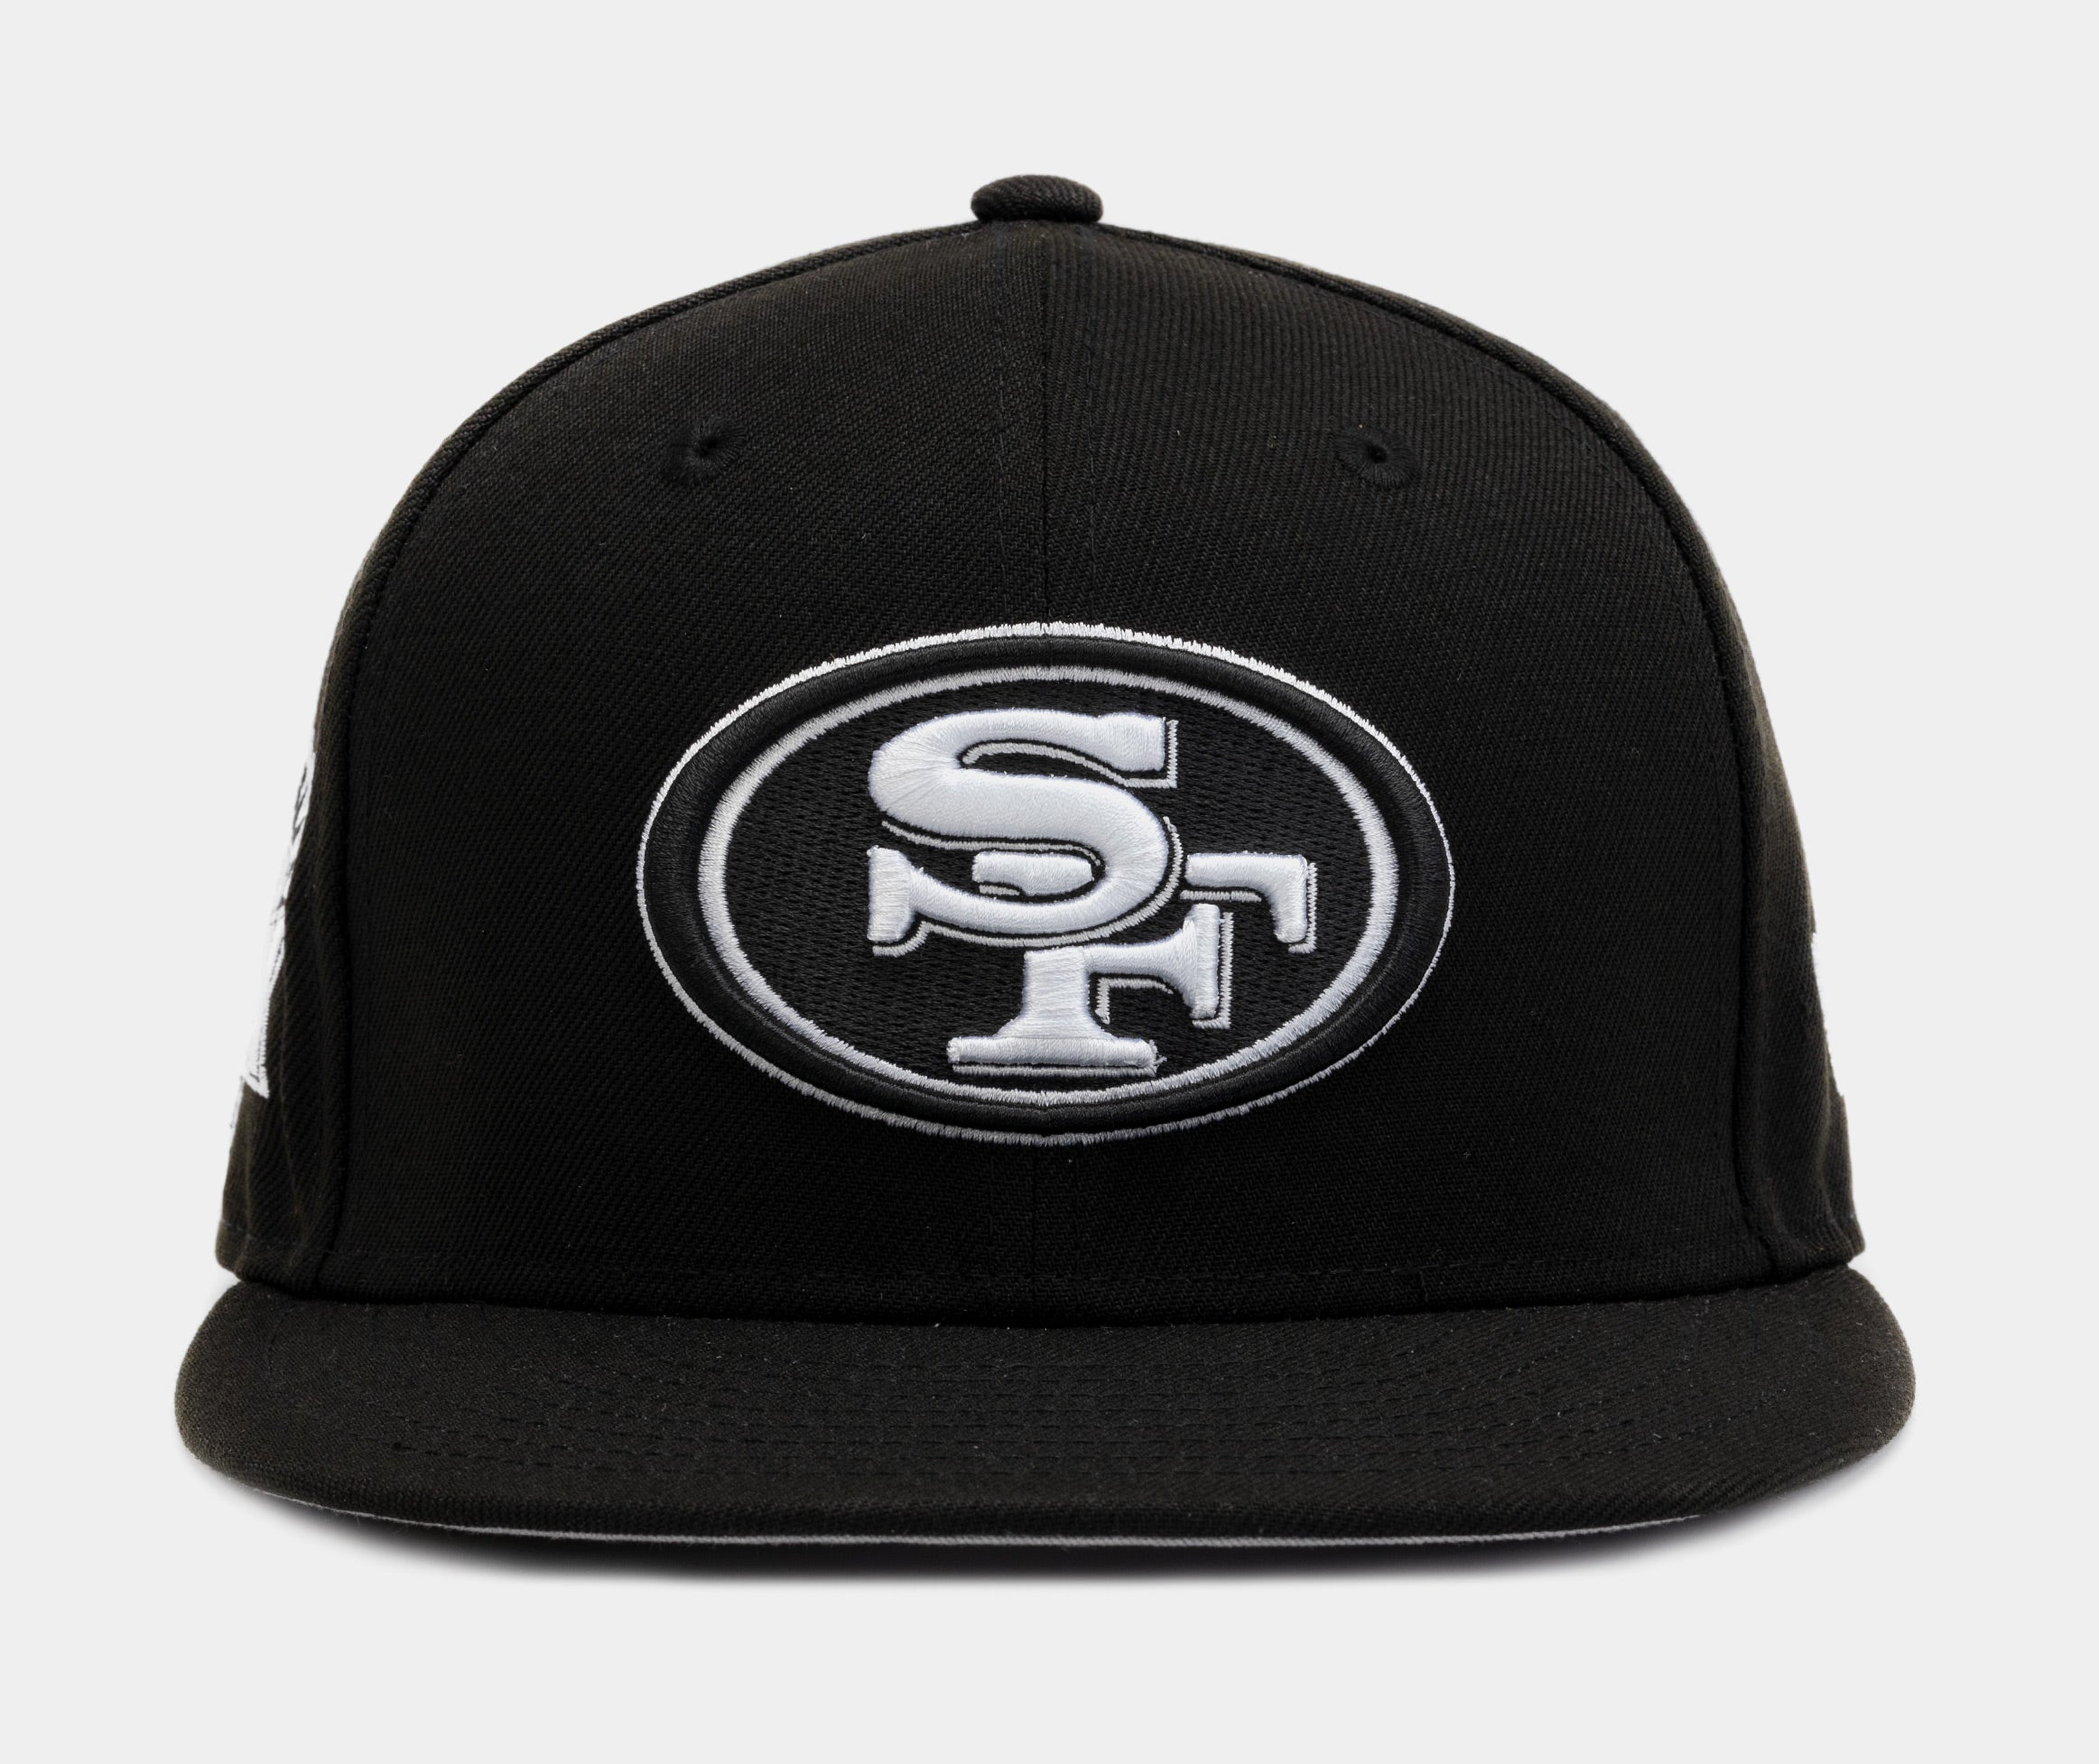 New Era San Francisco 49ers Black 59FIFTY Mens Fitted Hat (Black)